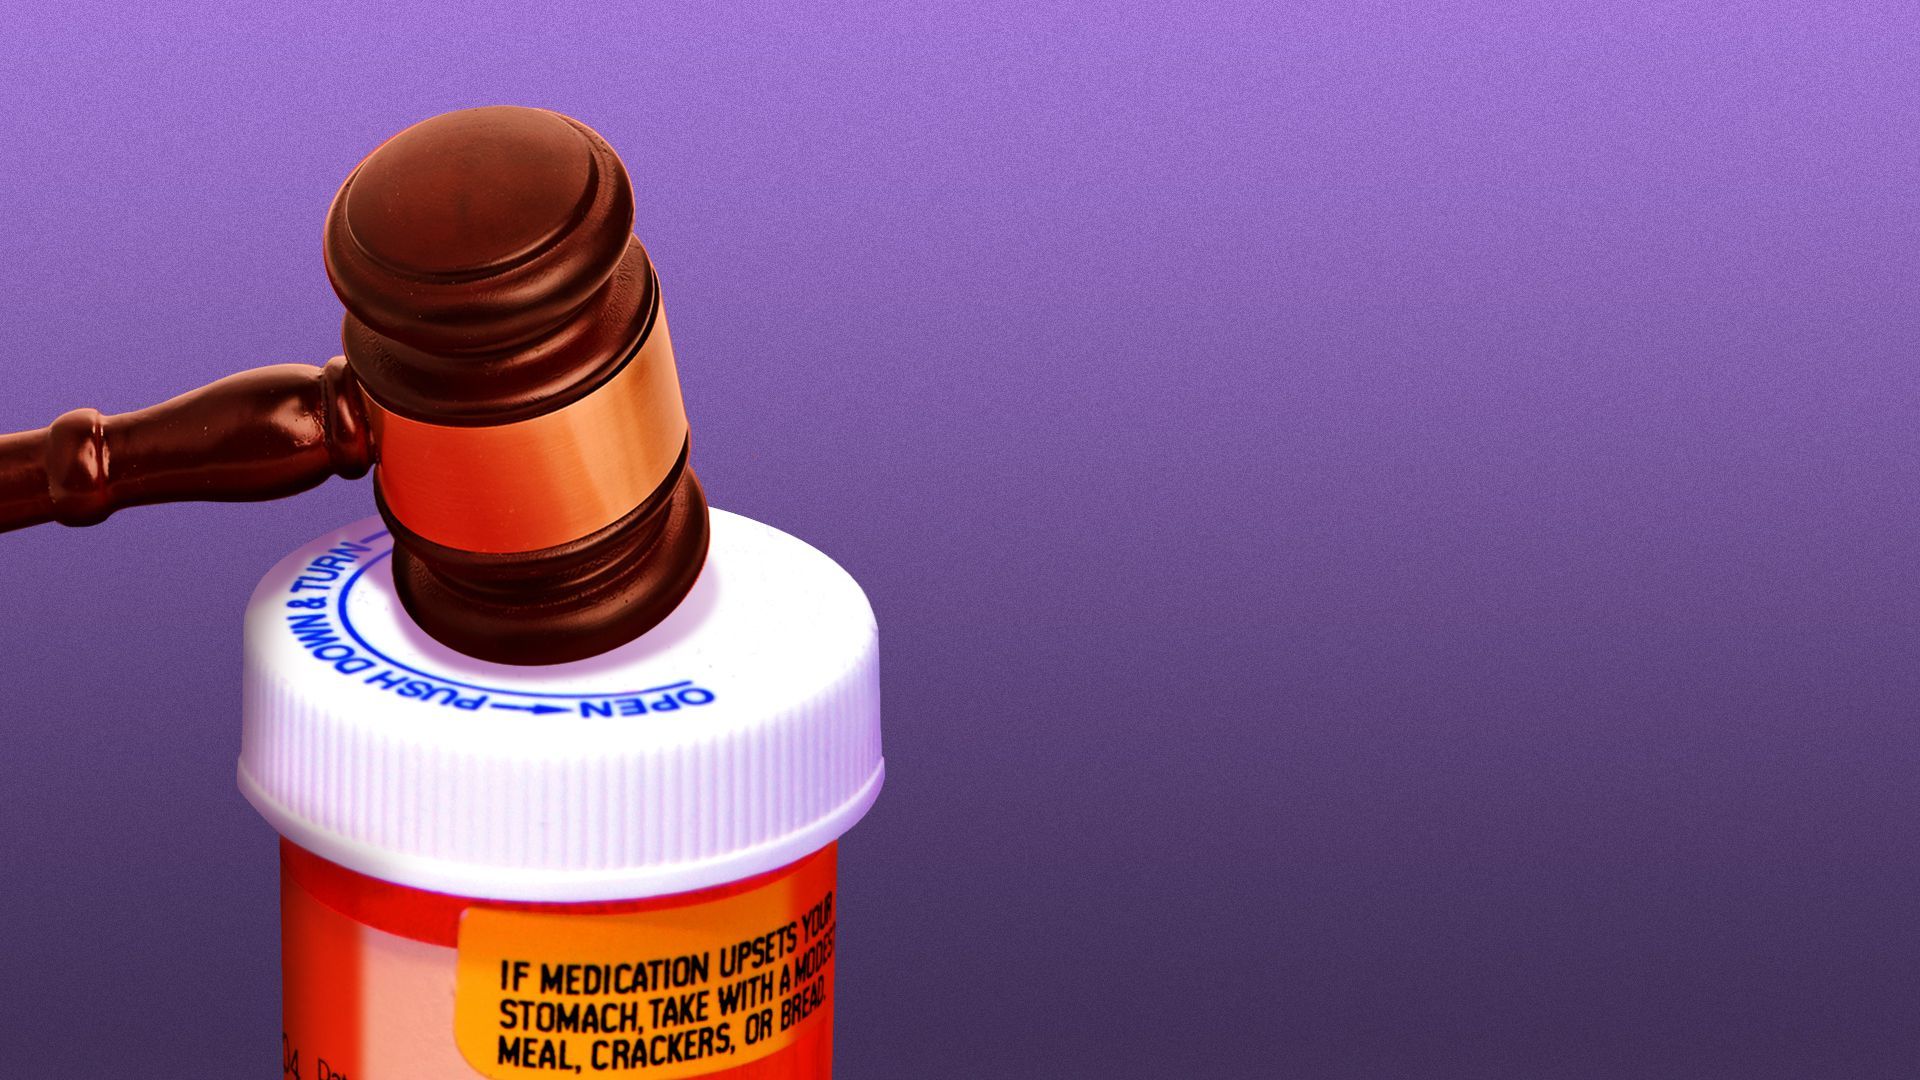 Illustration of a gavel hitting the top of a prescription pill bottle